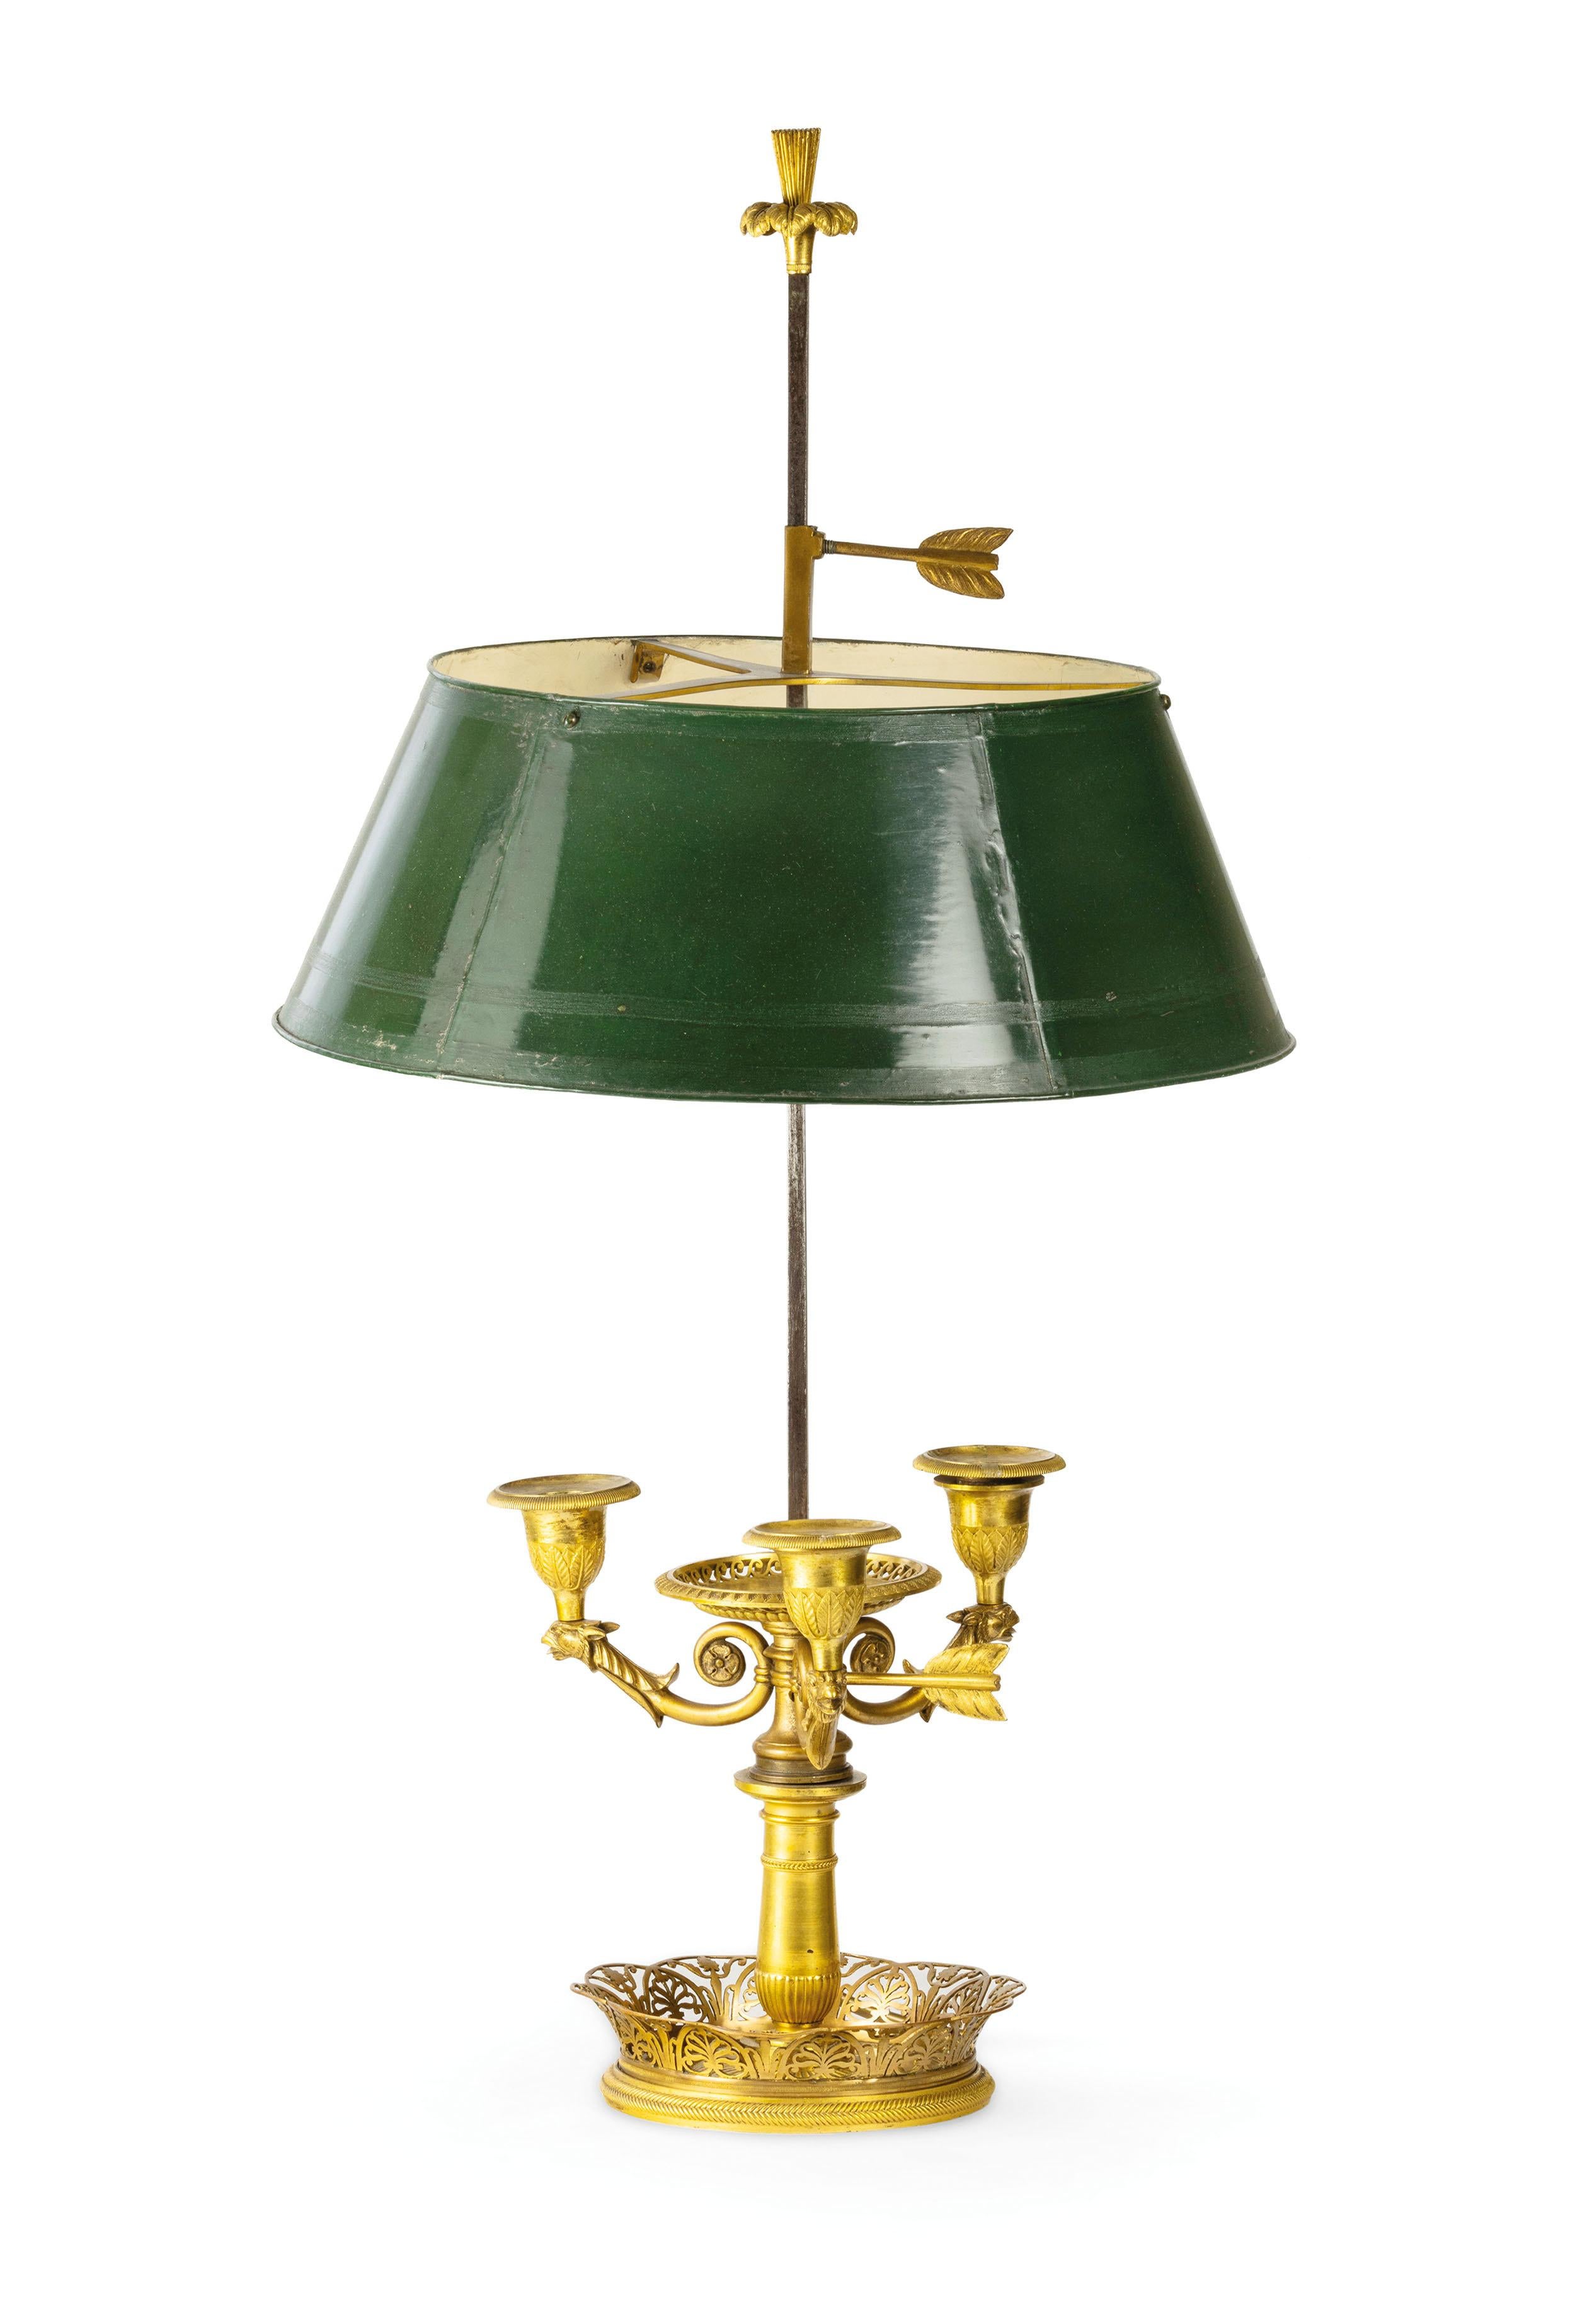 19th Century, French Gilt Bronze Buillotte Lamp 
This elegant table lamp model buillotte was made in France in the early nineteenth century, classic taste with decorative elements Empire. The structure is in finely chiselled and gilded gilded